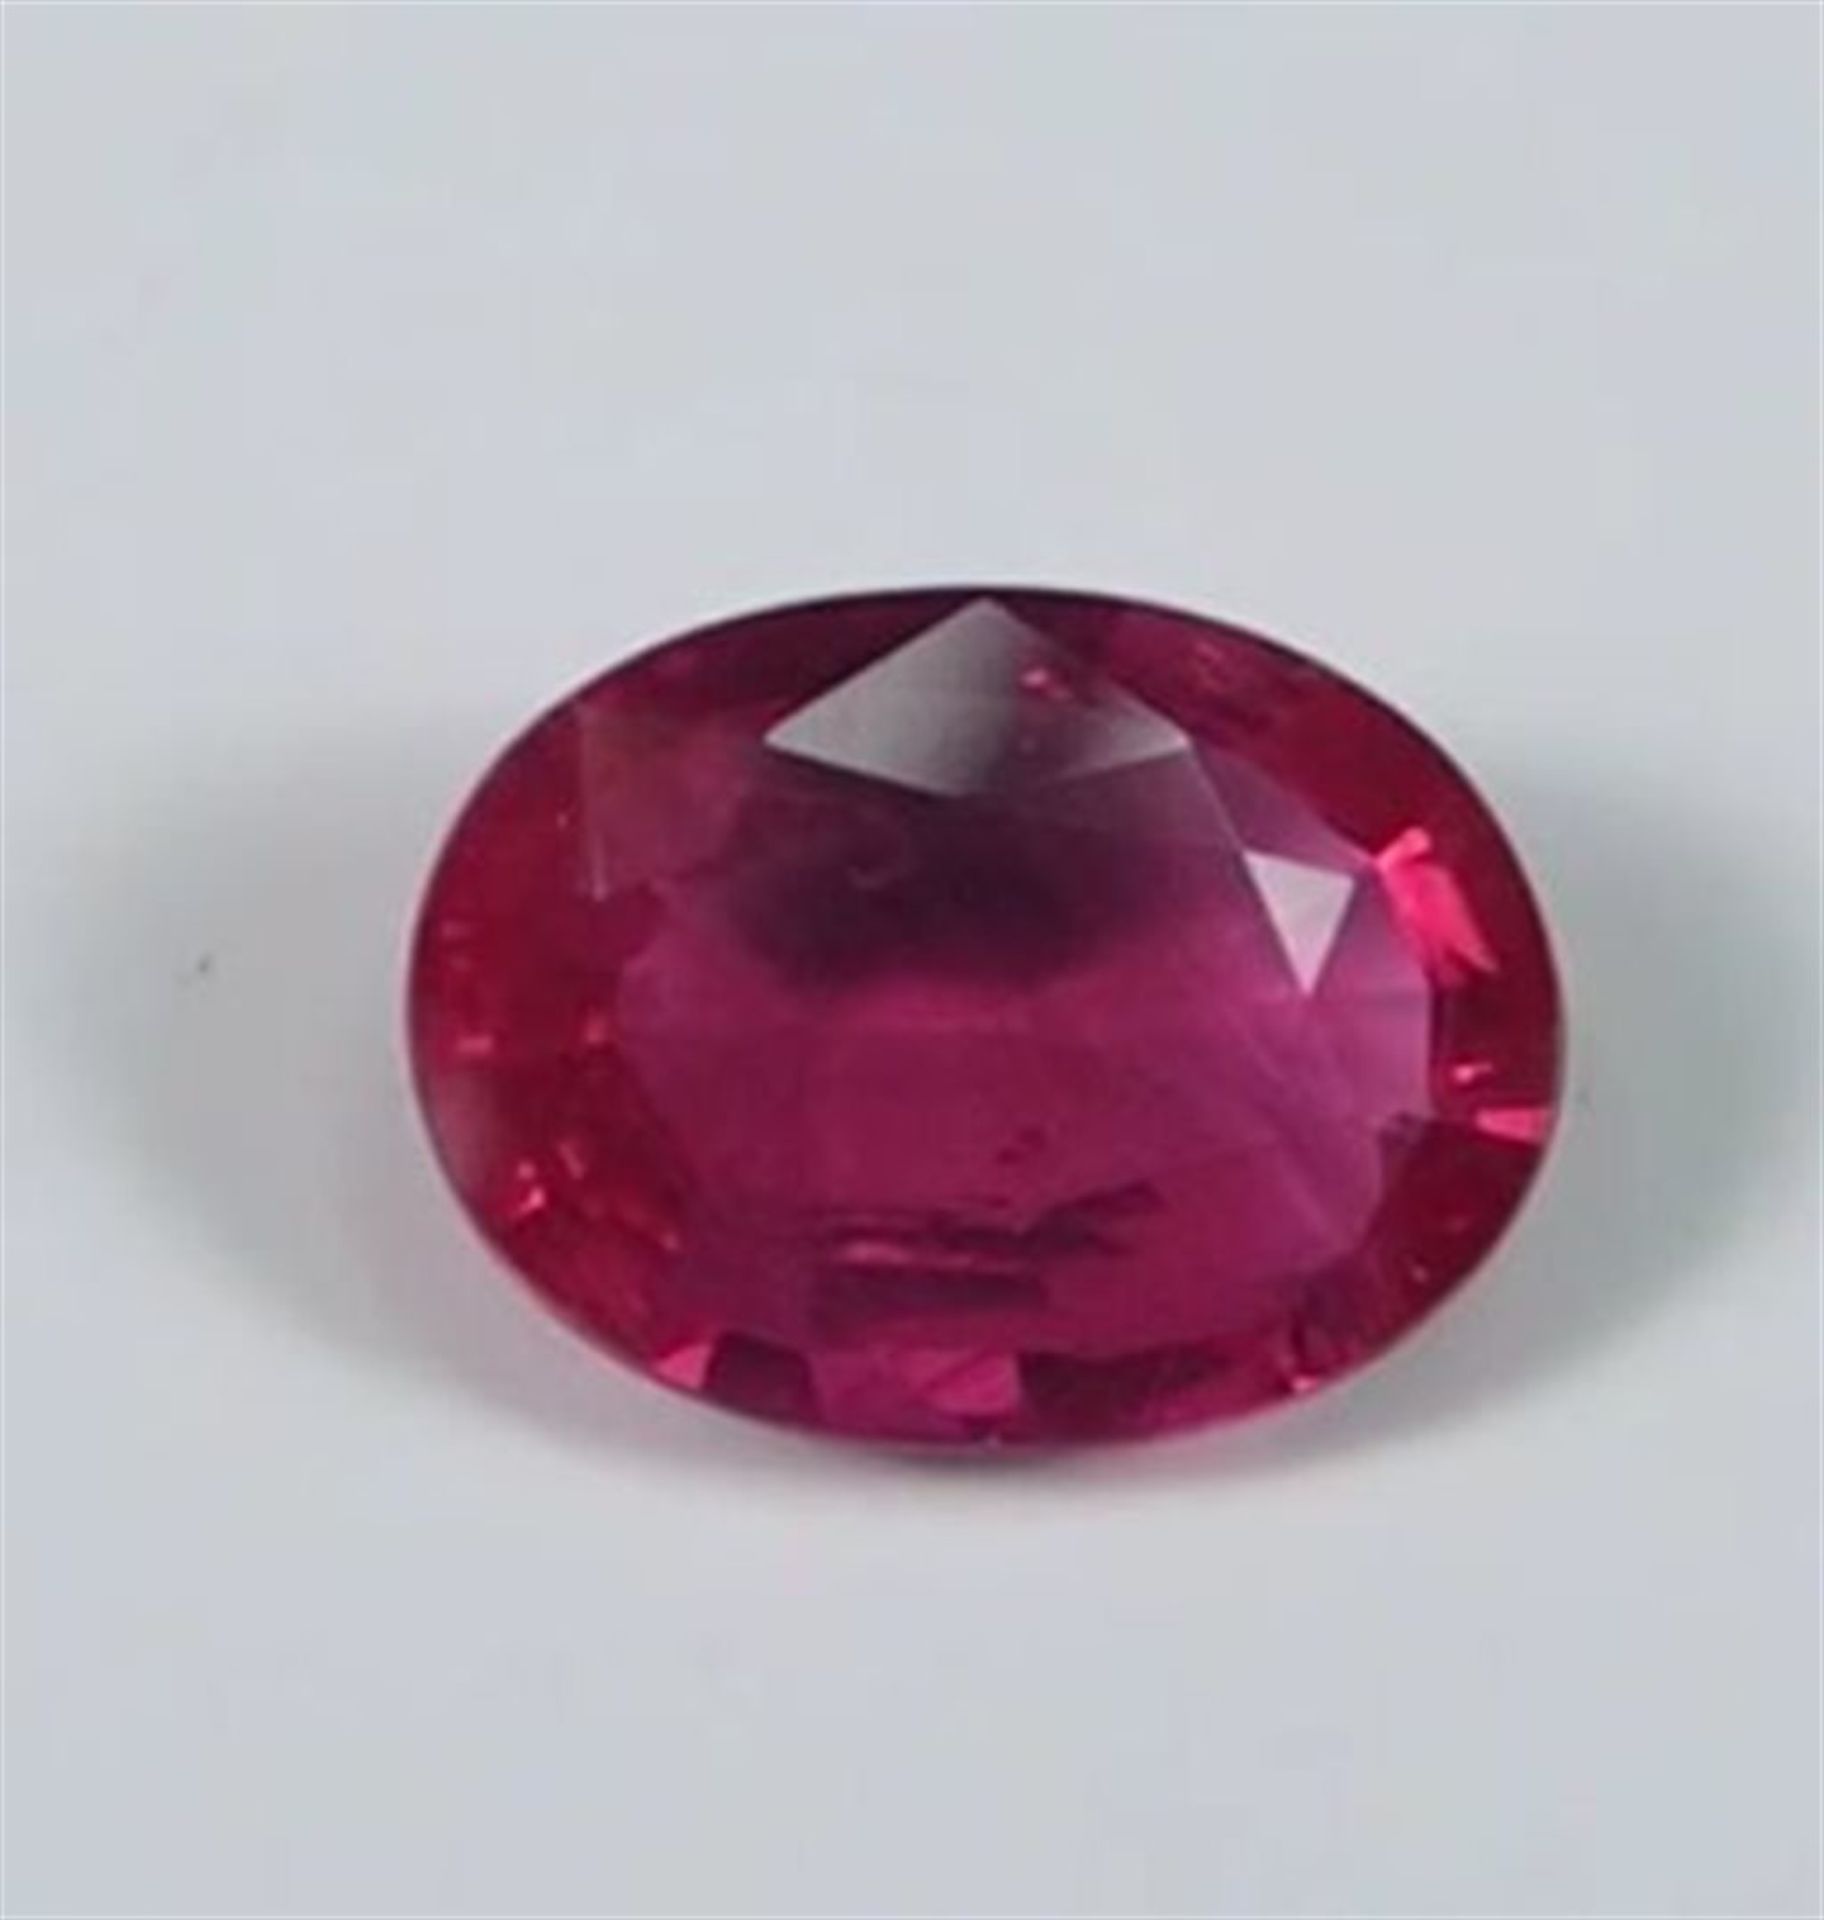 GIA Certified 1.22 ct. Untreated Ruby - BURMA - Image 3 of 10